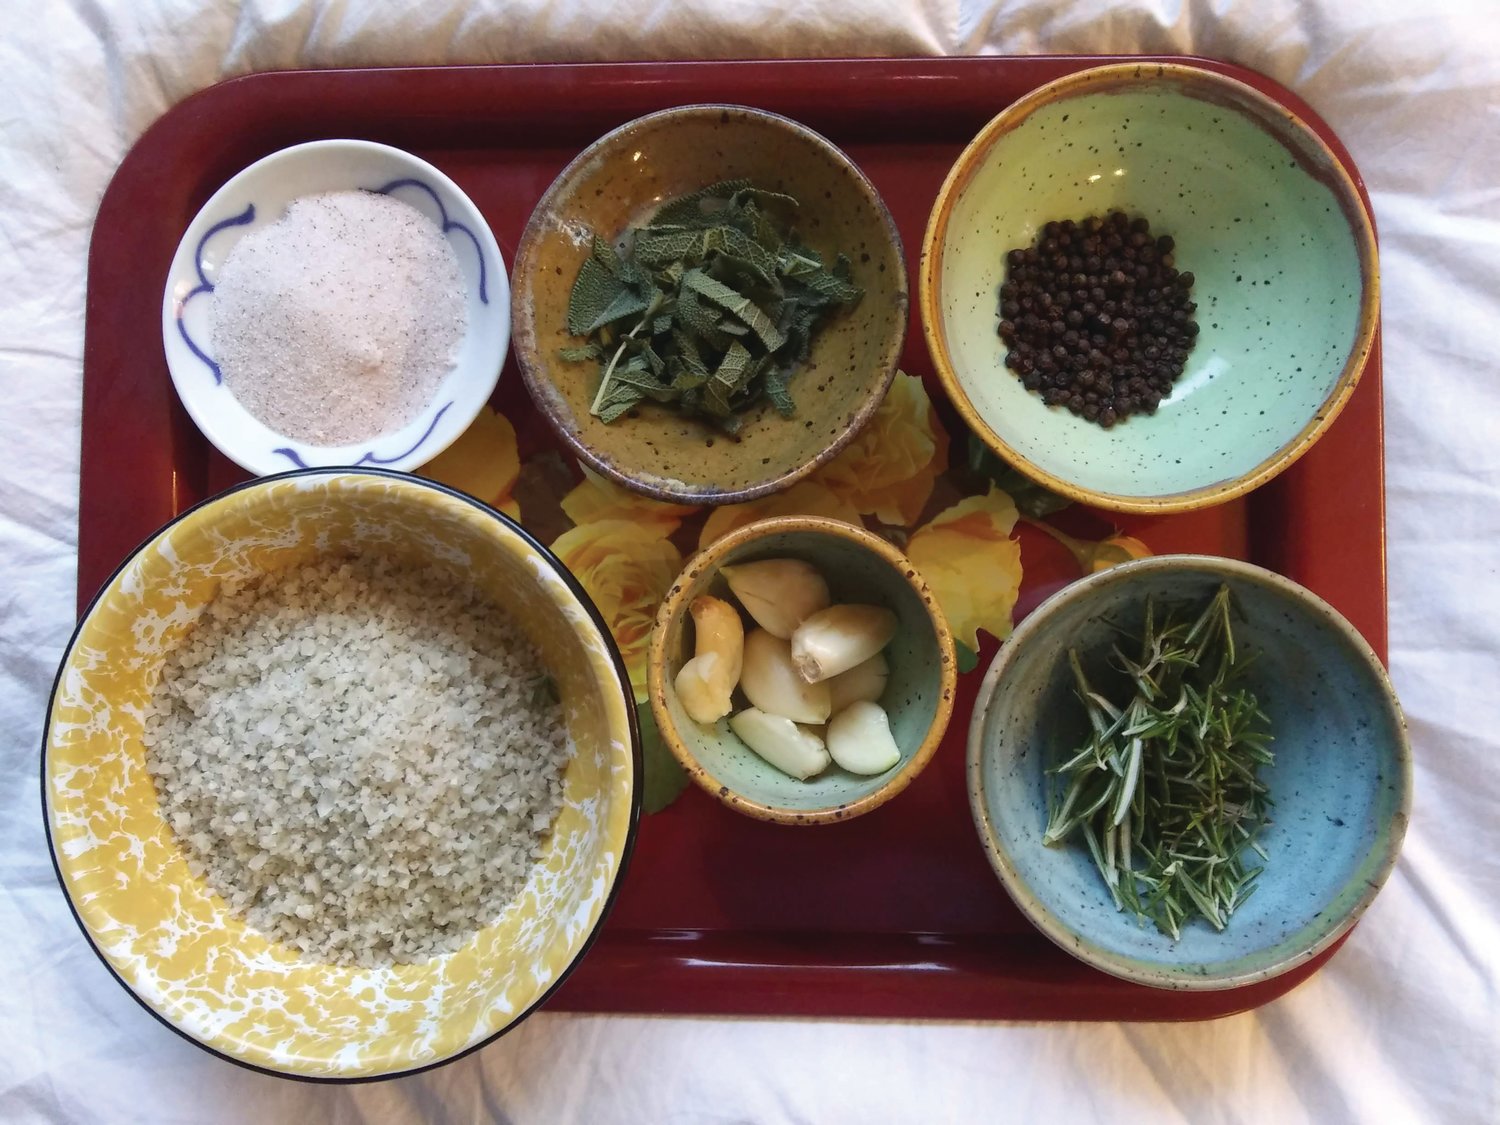 Garlic, peppercorns, sage, rosemary leaves, and other ingredients are ready to be combined for a batch of Sale Alle Erbe delle Port Townsend.